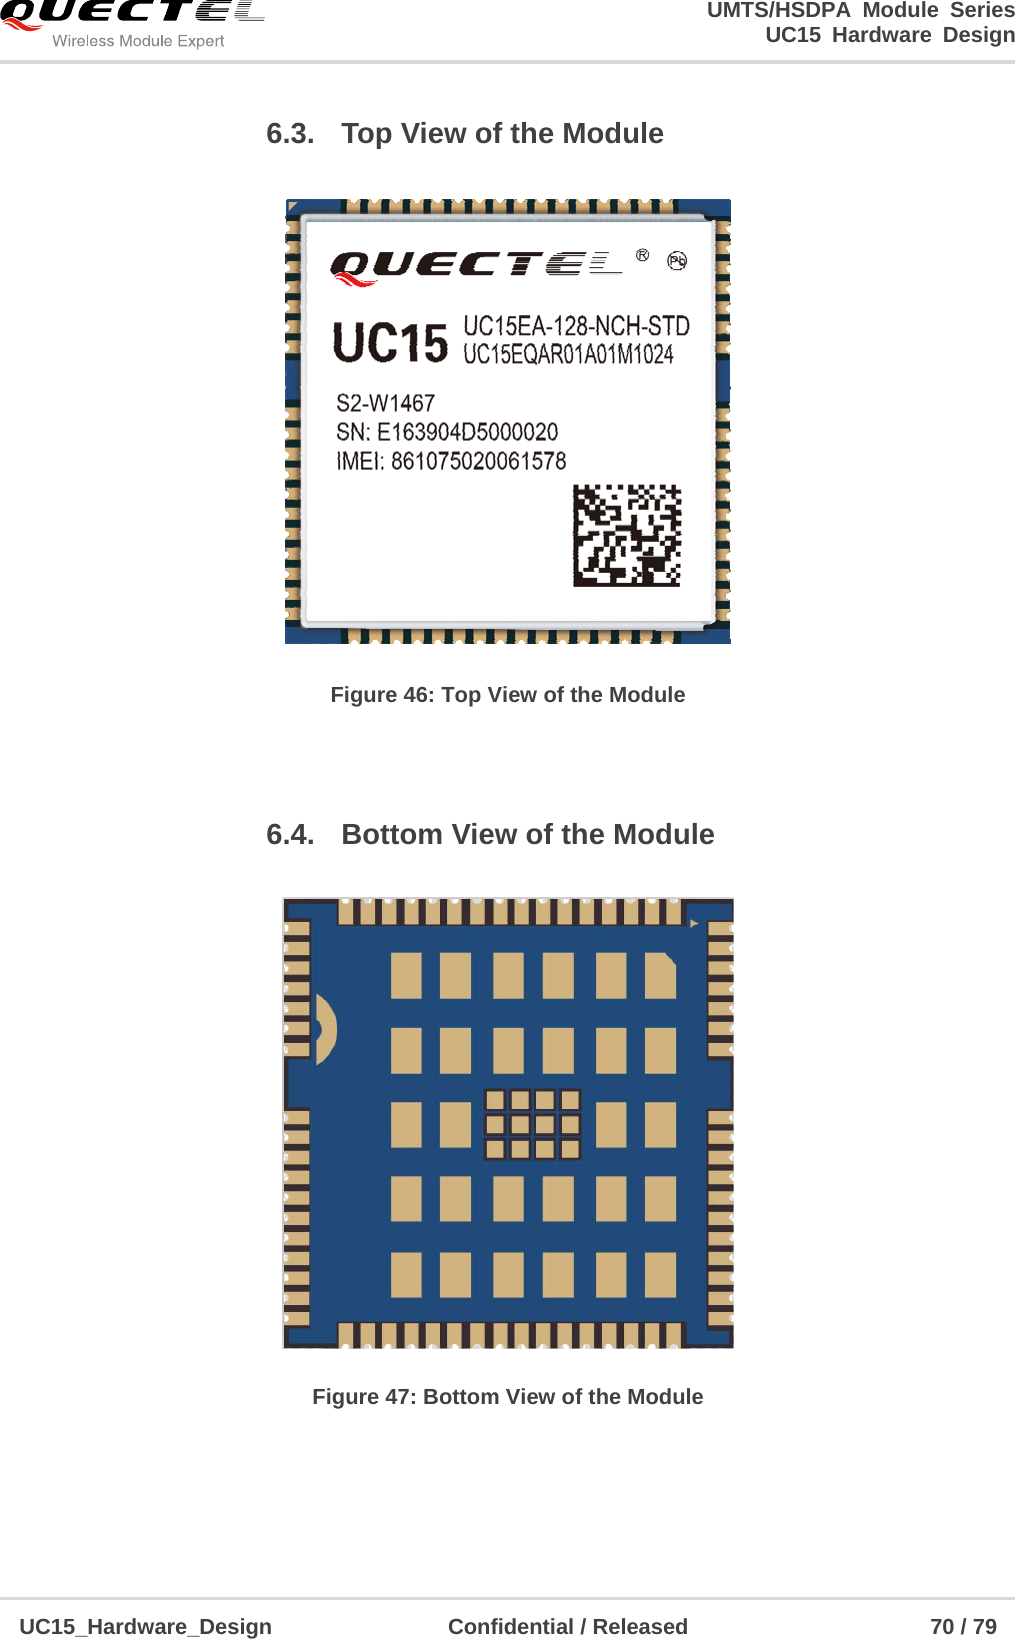                                                                        UMTS/HSDPA Module Series                                                                 UC15 Hardware Design  UC15_Hardware_Design                Confidential / Released                      70 / 79    6.3.  Top View of the Module  Figure 46: Top View of the Module  6.4.  Bottom View of the Module  Figure 47: Bottom View of the Module 